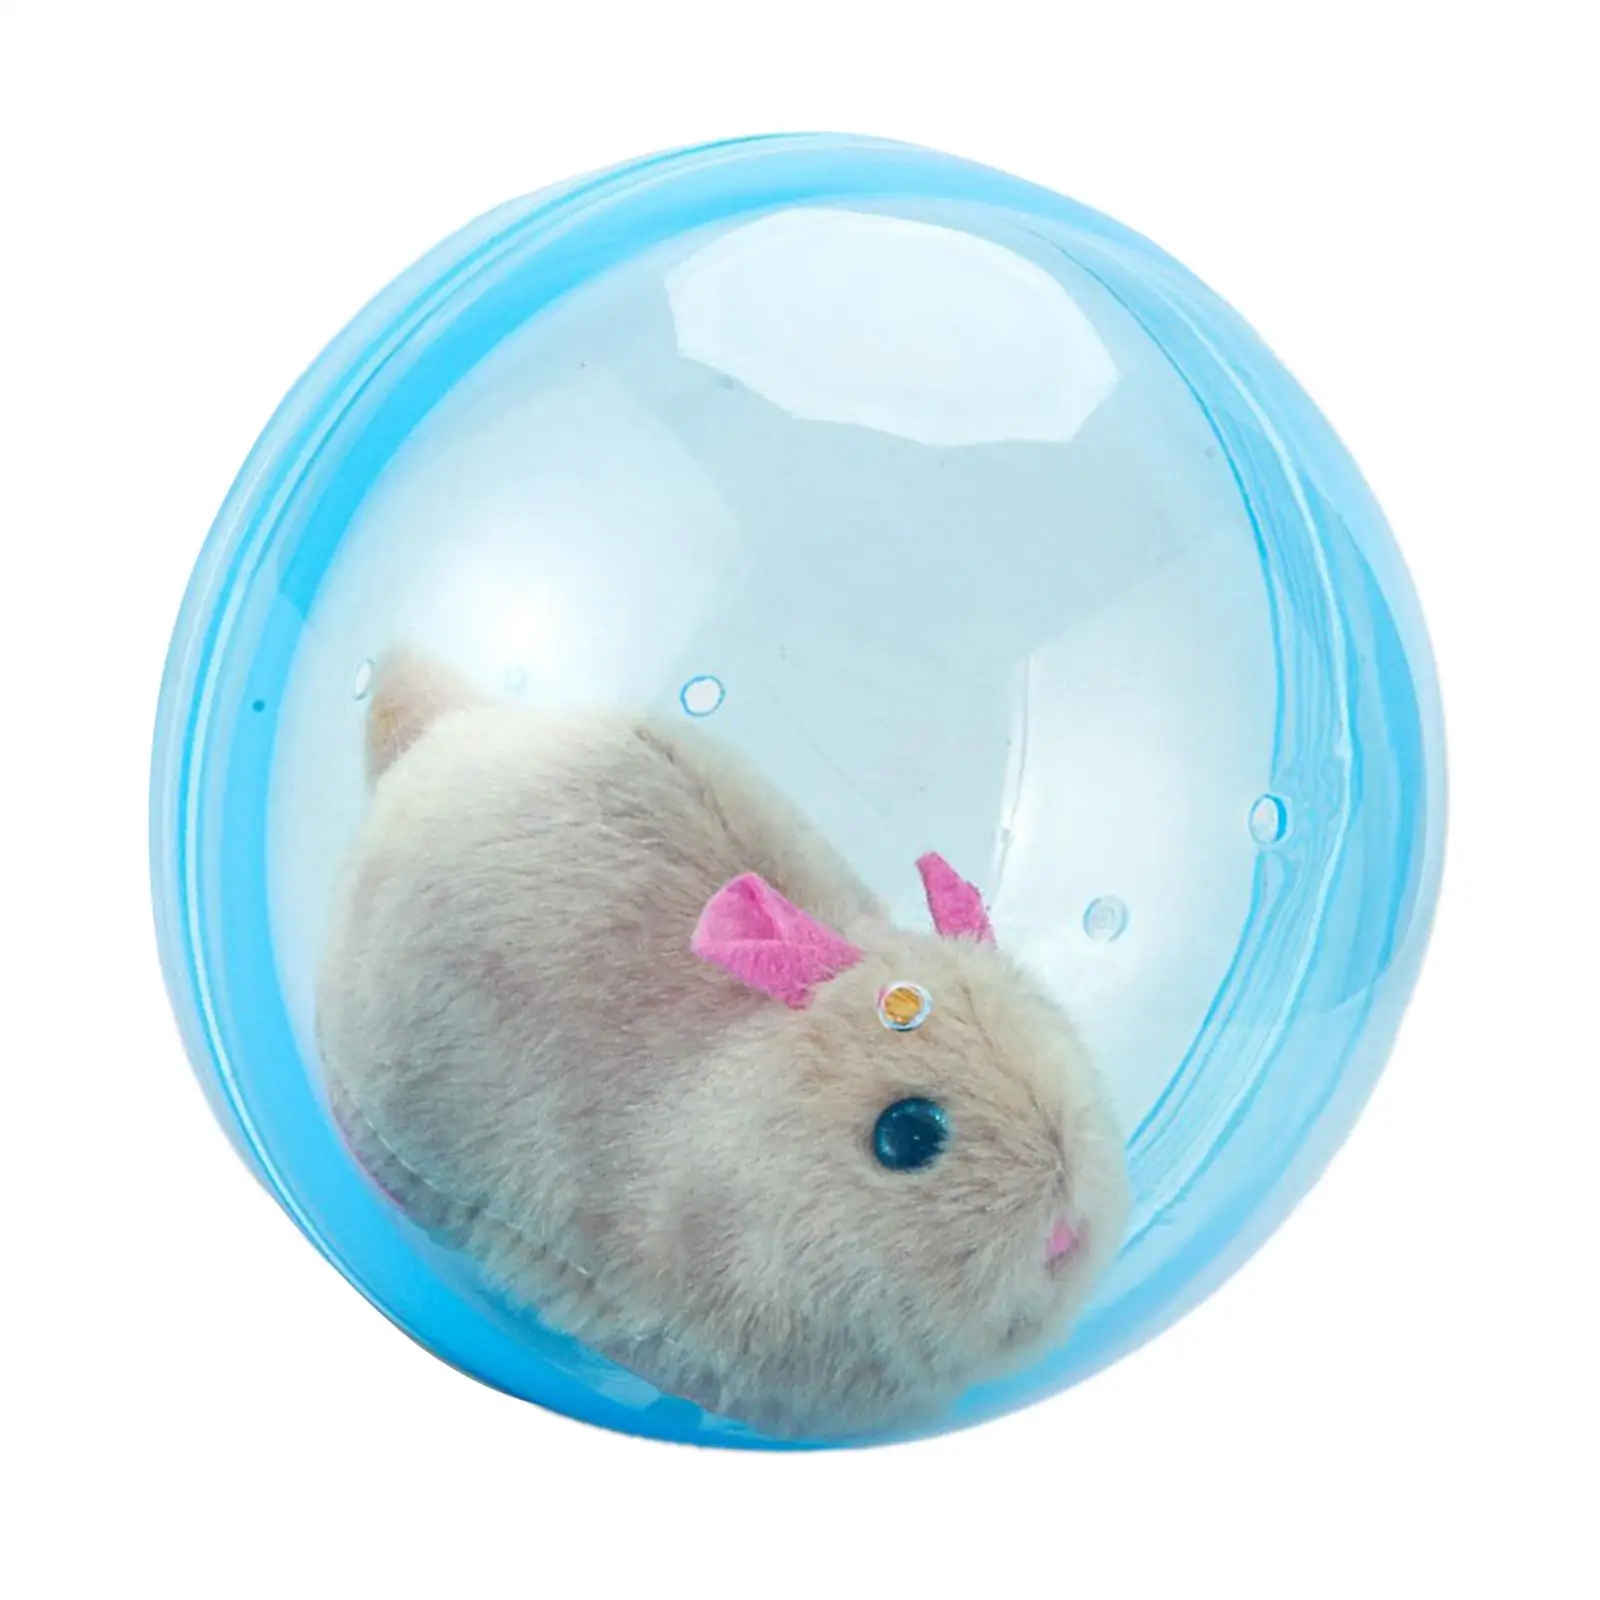 Ball Toys Electronic Pets Toy Interactive for Girls Kids Birthday Gifts